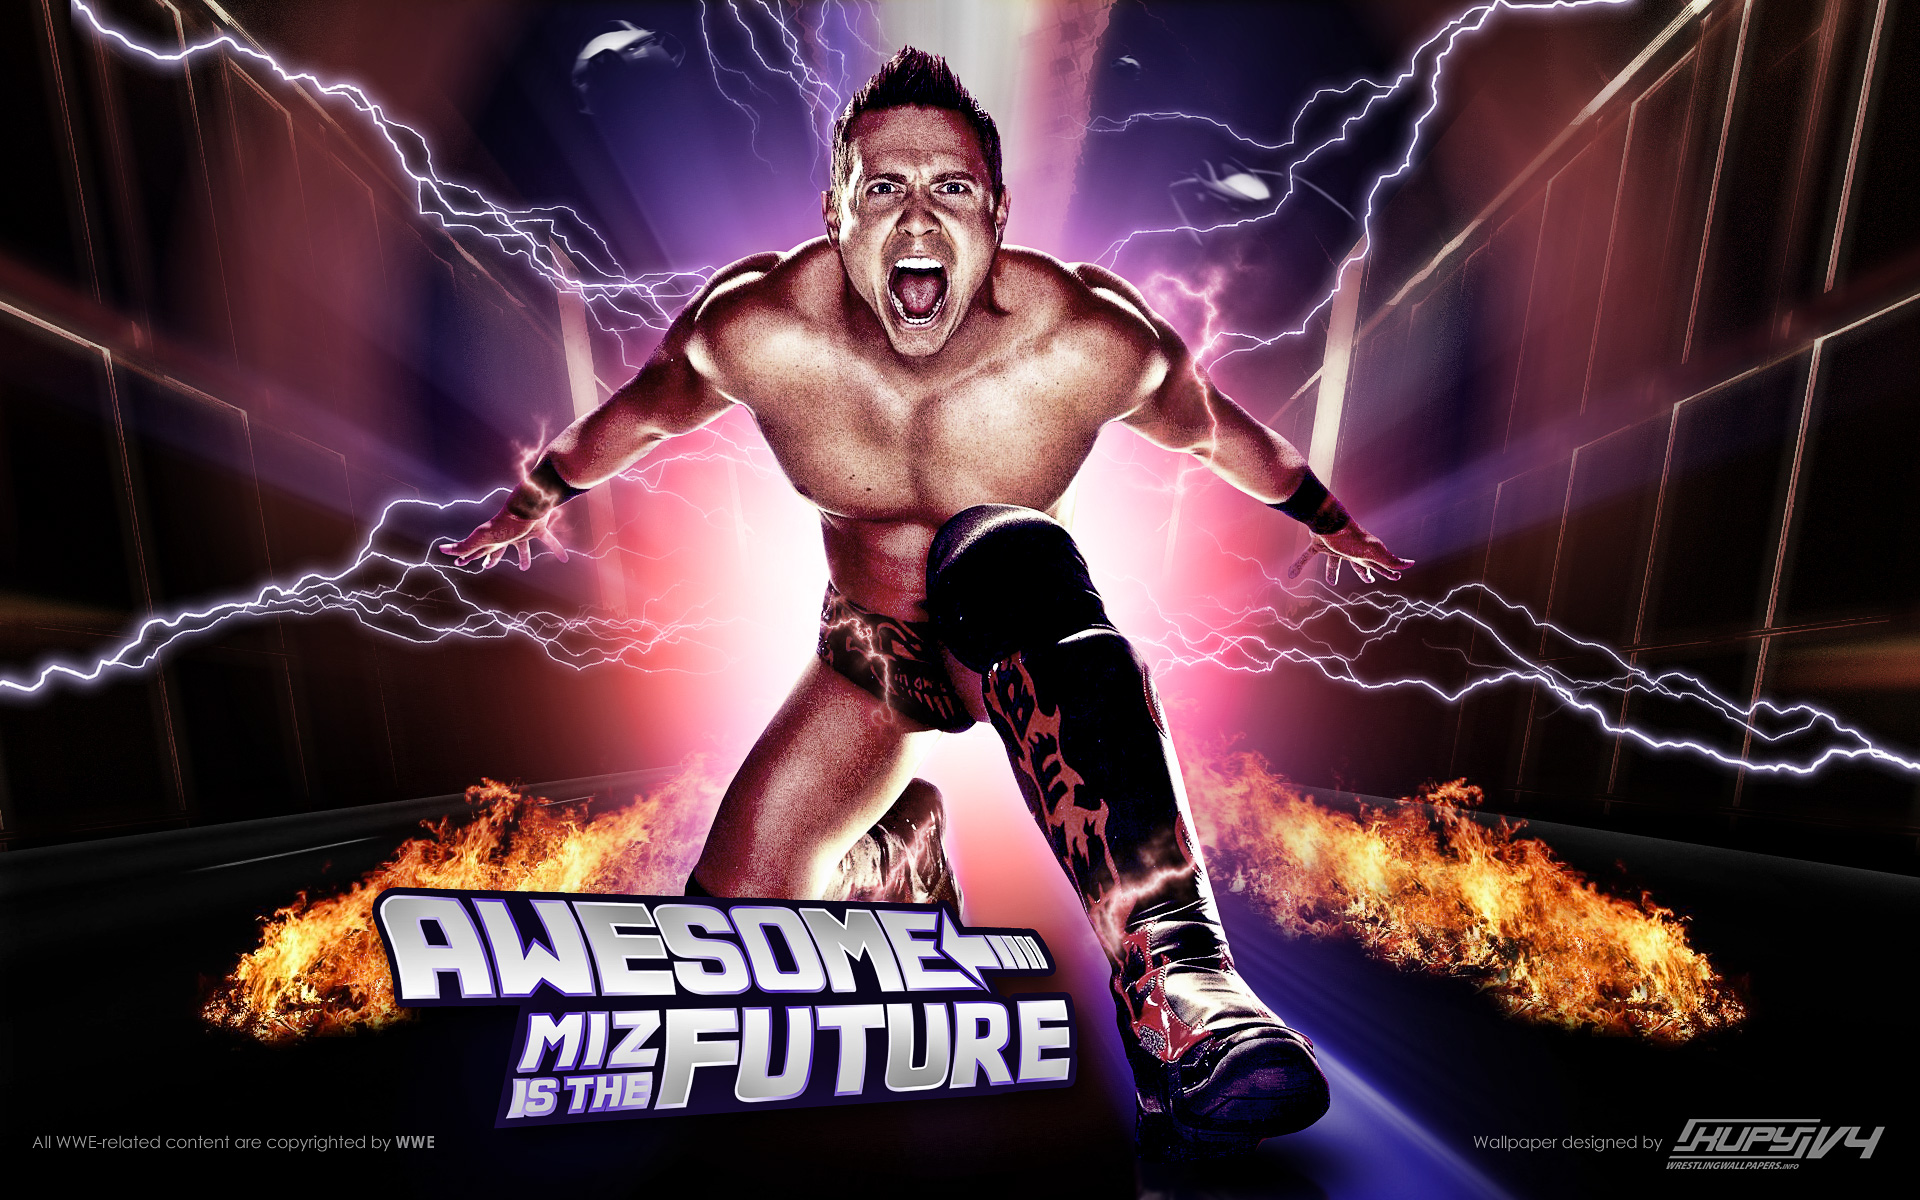 NEW The Miz is the Future wallpaper! - Kupy Wrestling Wallpapers